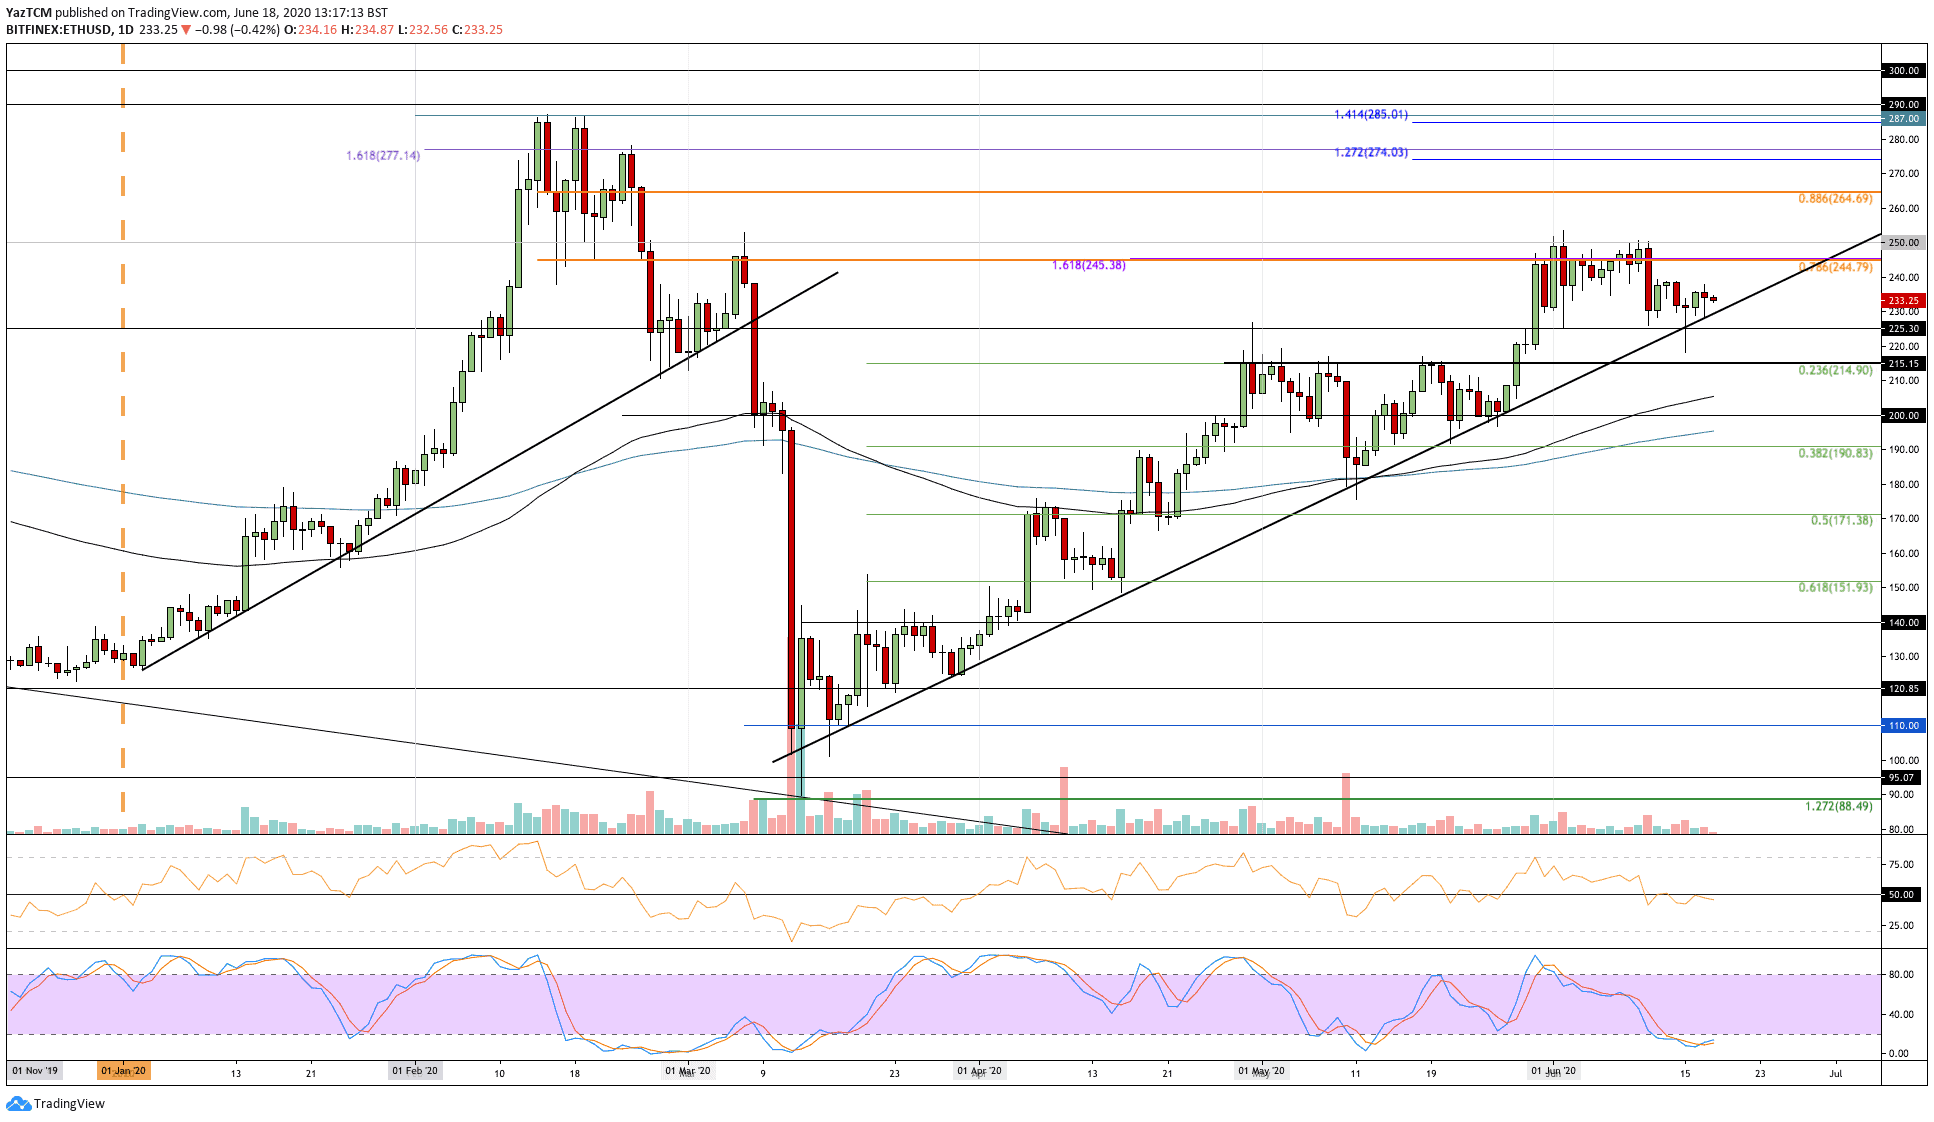 Ethereum Price Analysis: Bullish Trend Intact But ETH Is Testing Critical Support